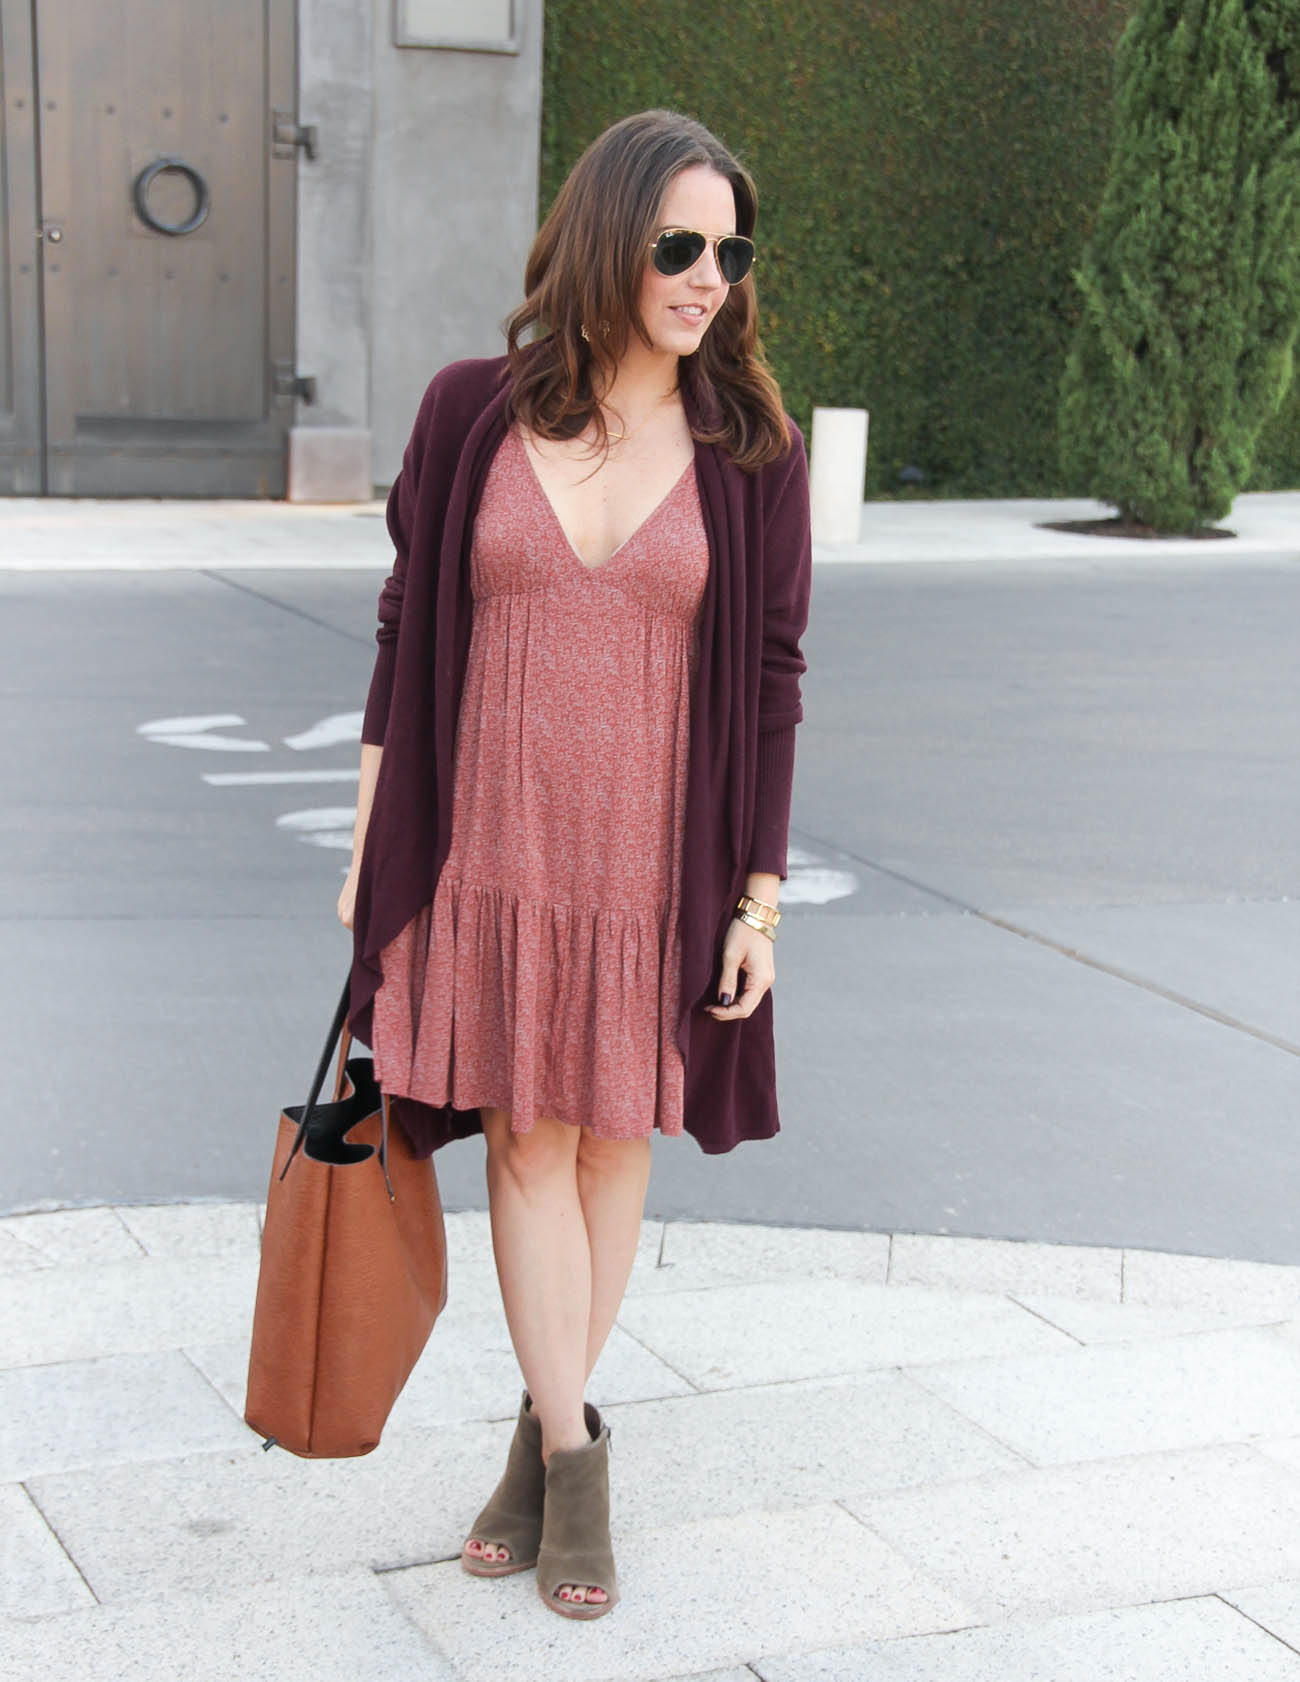 Closet Fashionista: {outfit} Transitioning to Fall with Layered